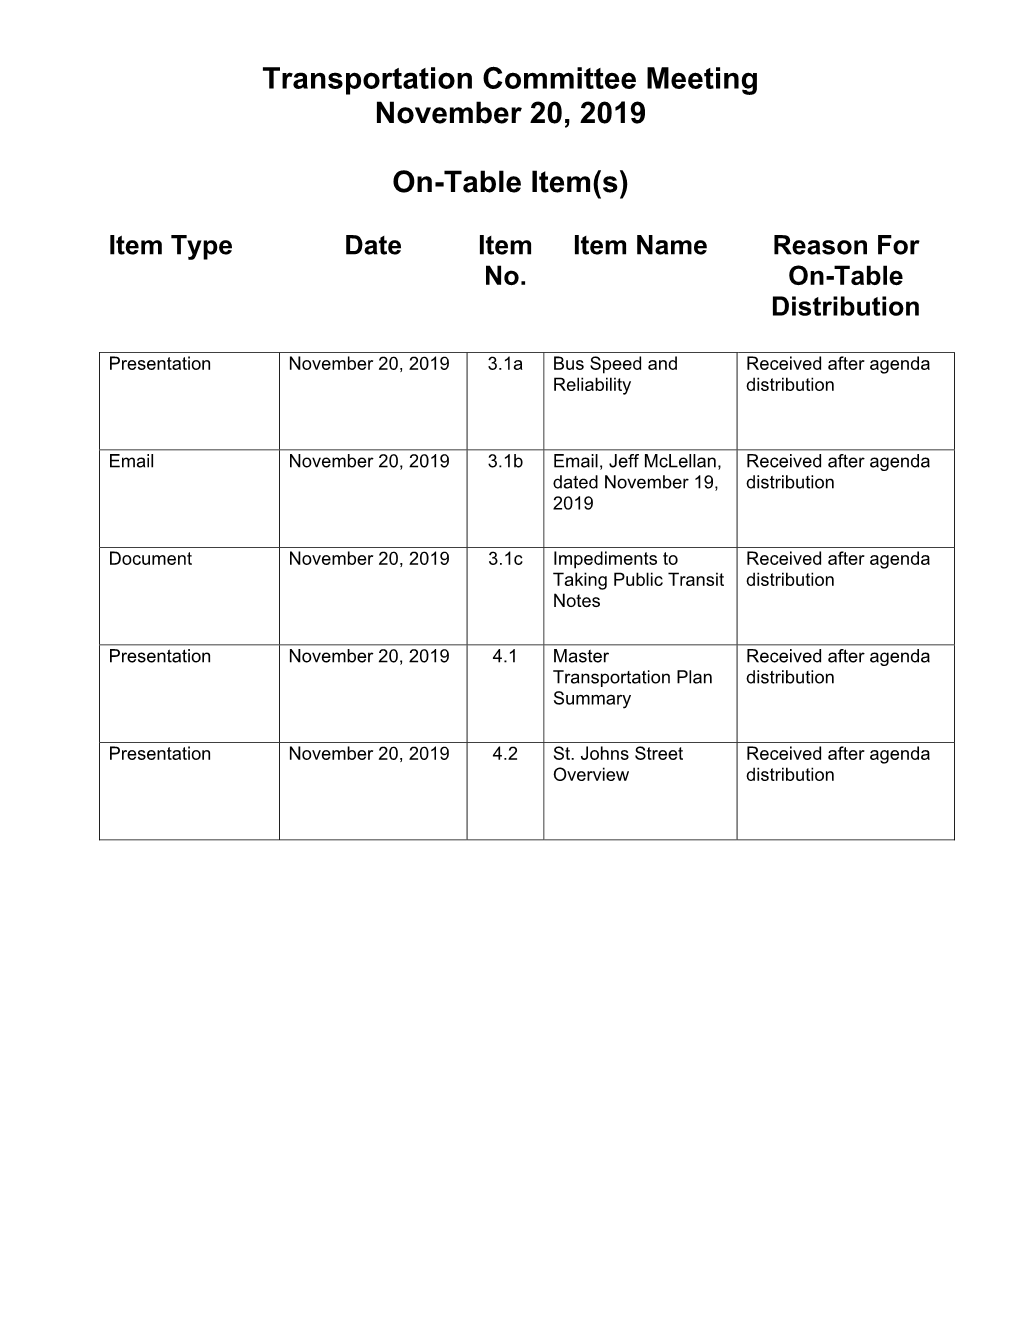 Transportation Committee Meeting November 20, 2019 On-Table Item(S)